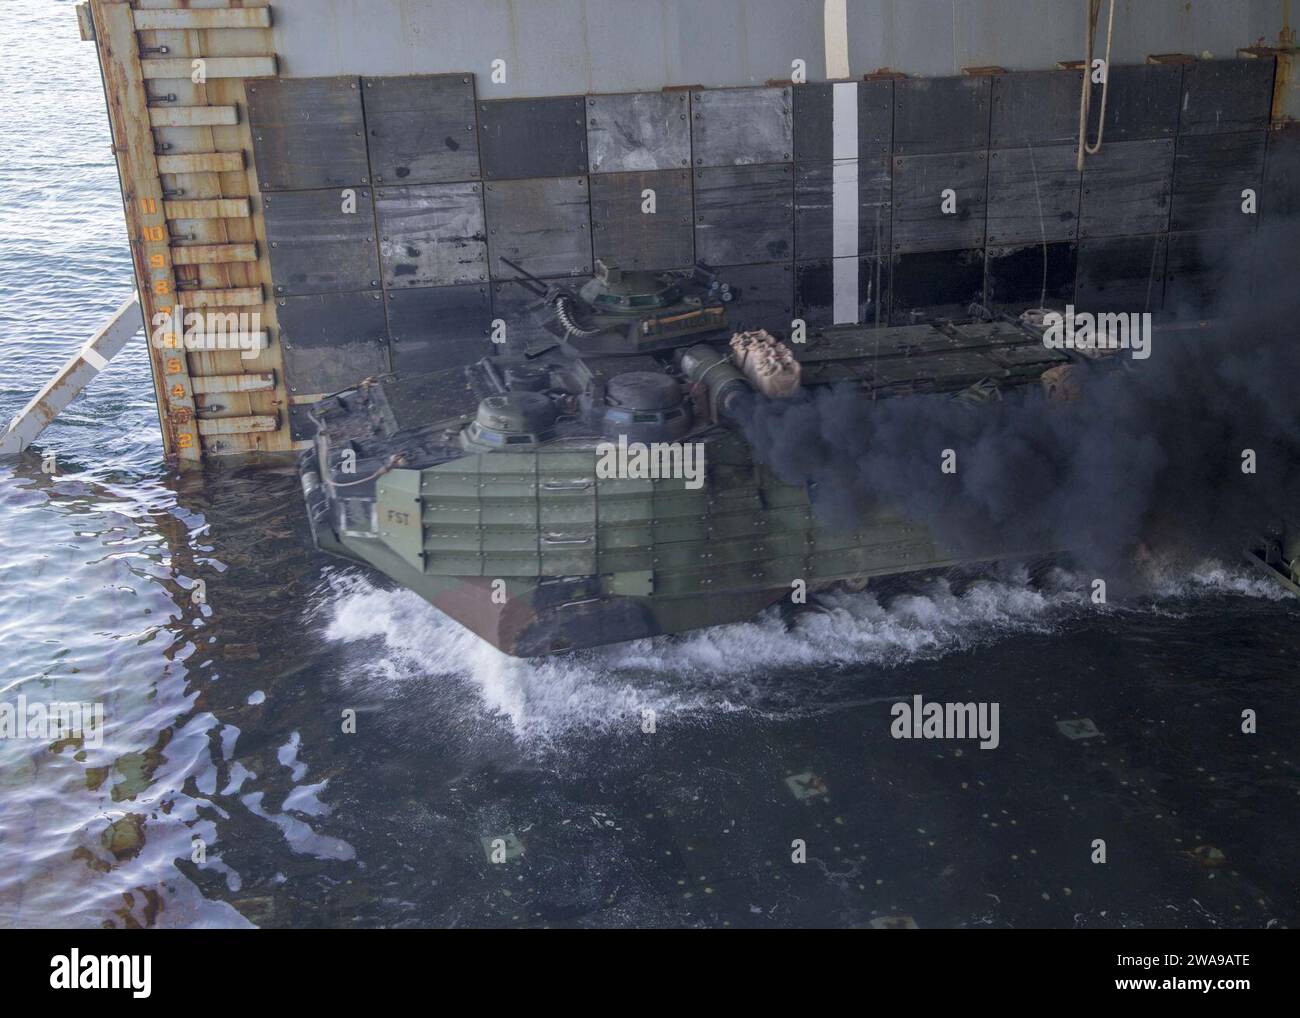 US military forces. 180607PC620-0063 BALTIC SEA (June 7, 2018) An AAV-P7/A1 assault amphibious vehicle attached to the 26th Marine Expeditionary Unit departs the well deck of the Harpers Ferry-class dock landing ship USS Oak Hill (LSD 51) during an amphibious assault exercise during exercise Baltic Operations (BALTOPS) 2018, June 7. BALTOPS is the premier annual maritime-focused exercise in the Baltic region and one of the largest exercises in Northern Europe enhancing flexibility and interoperability among allied and partner nations. (U.S. Navy photo by Mass Communication Specialist 3rd Class Stock Photo